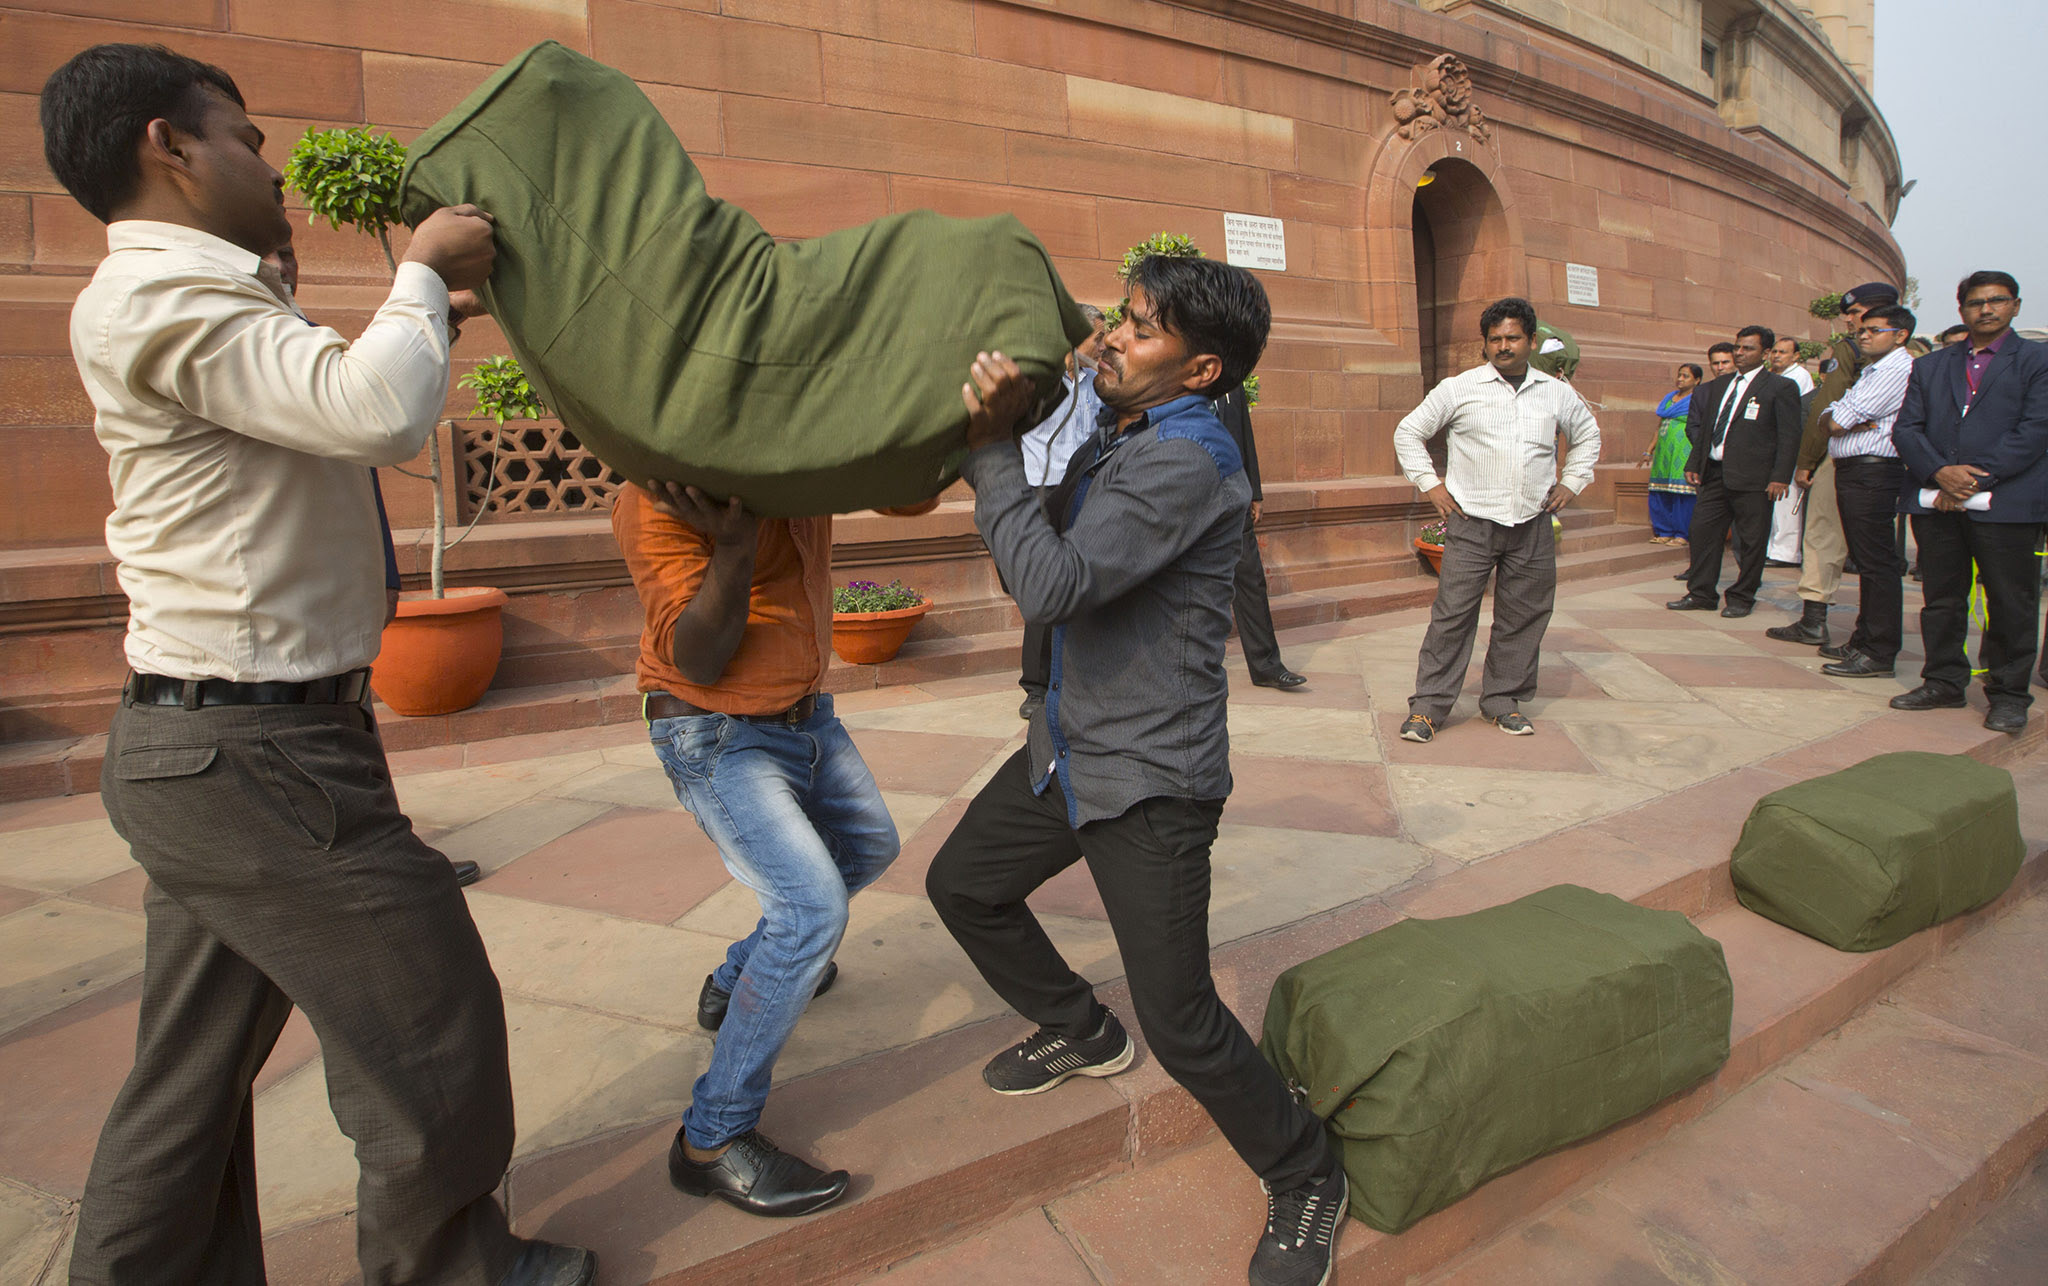 Indian workers carry a bag containing copies of the federal budget for the year 2016-17, that will be distributed to lawmakers at the parliament house in New Delhi, India.